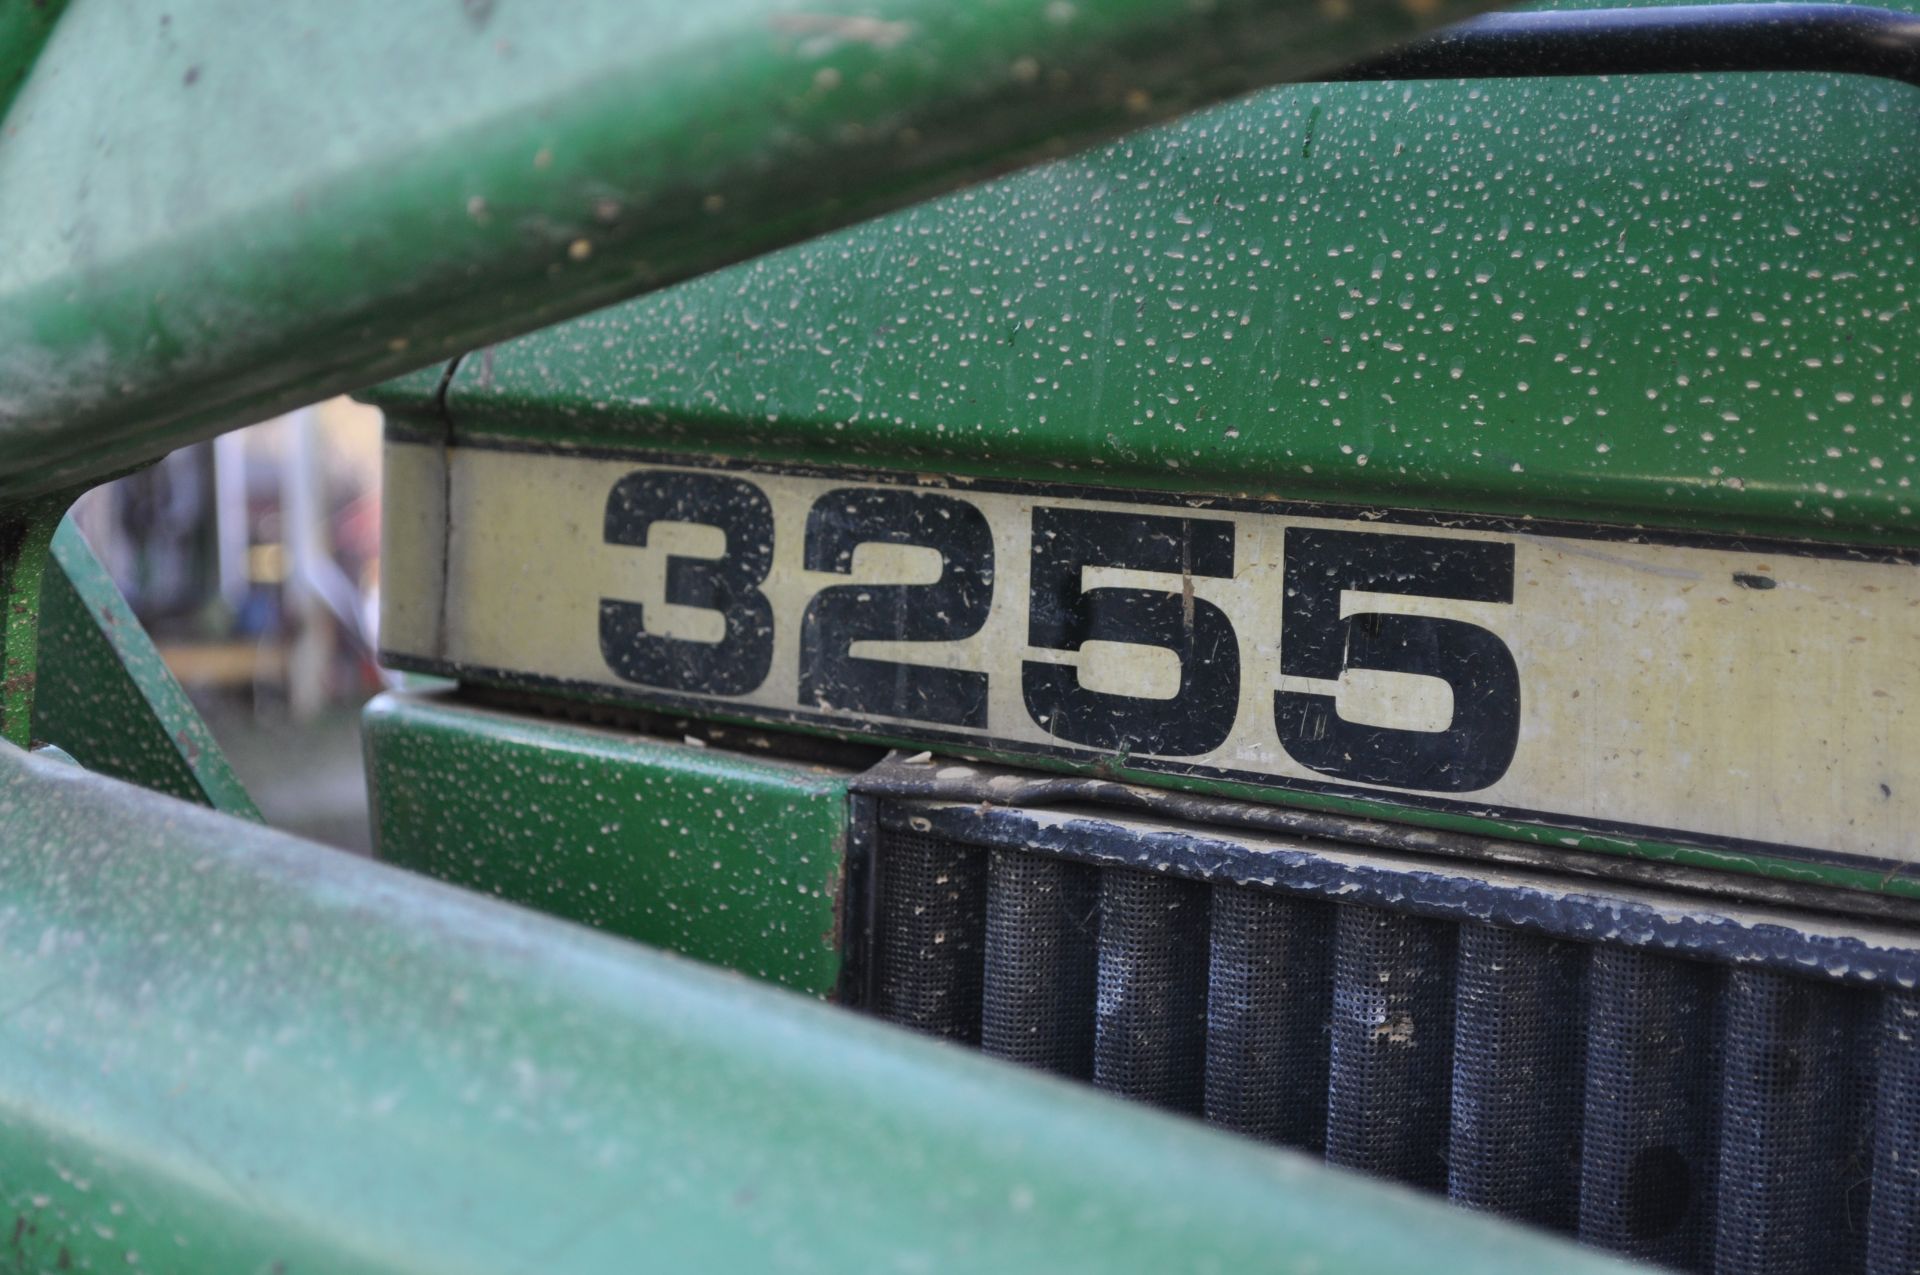 John Deere 3255 tractor, MFWD, C/H/A, 18.4-38 rear, 13.6-28 front, rear wheel weights, 2 hyd remotes - Image 4 of 28